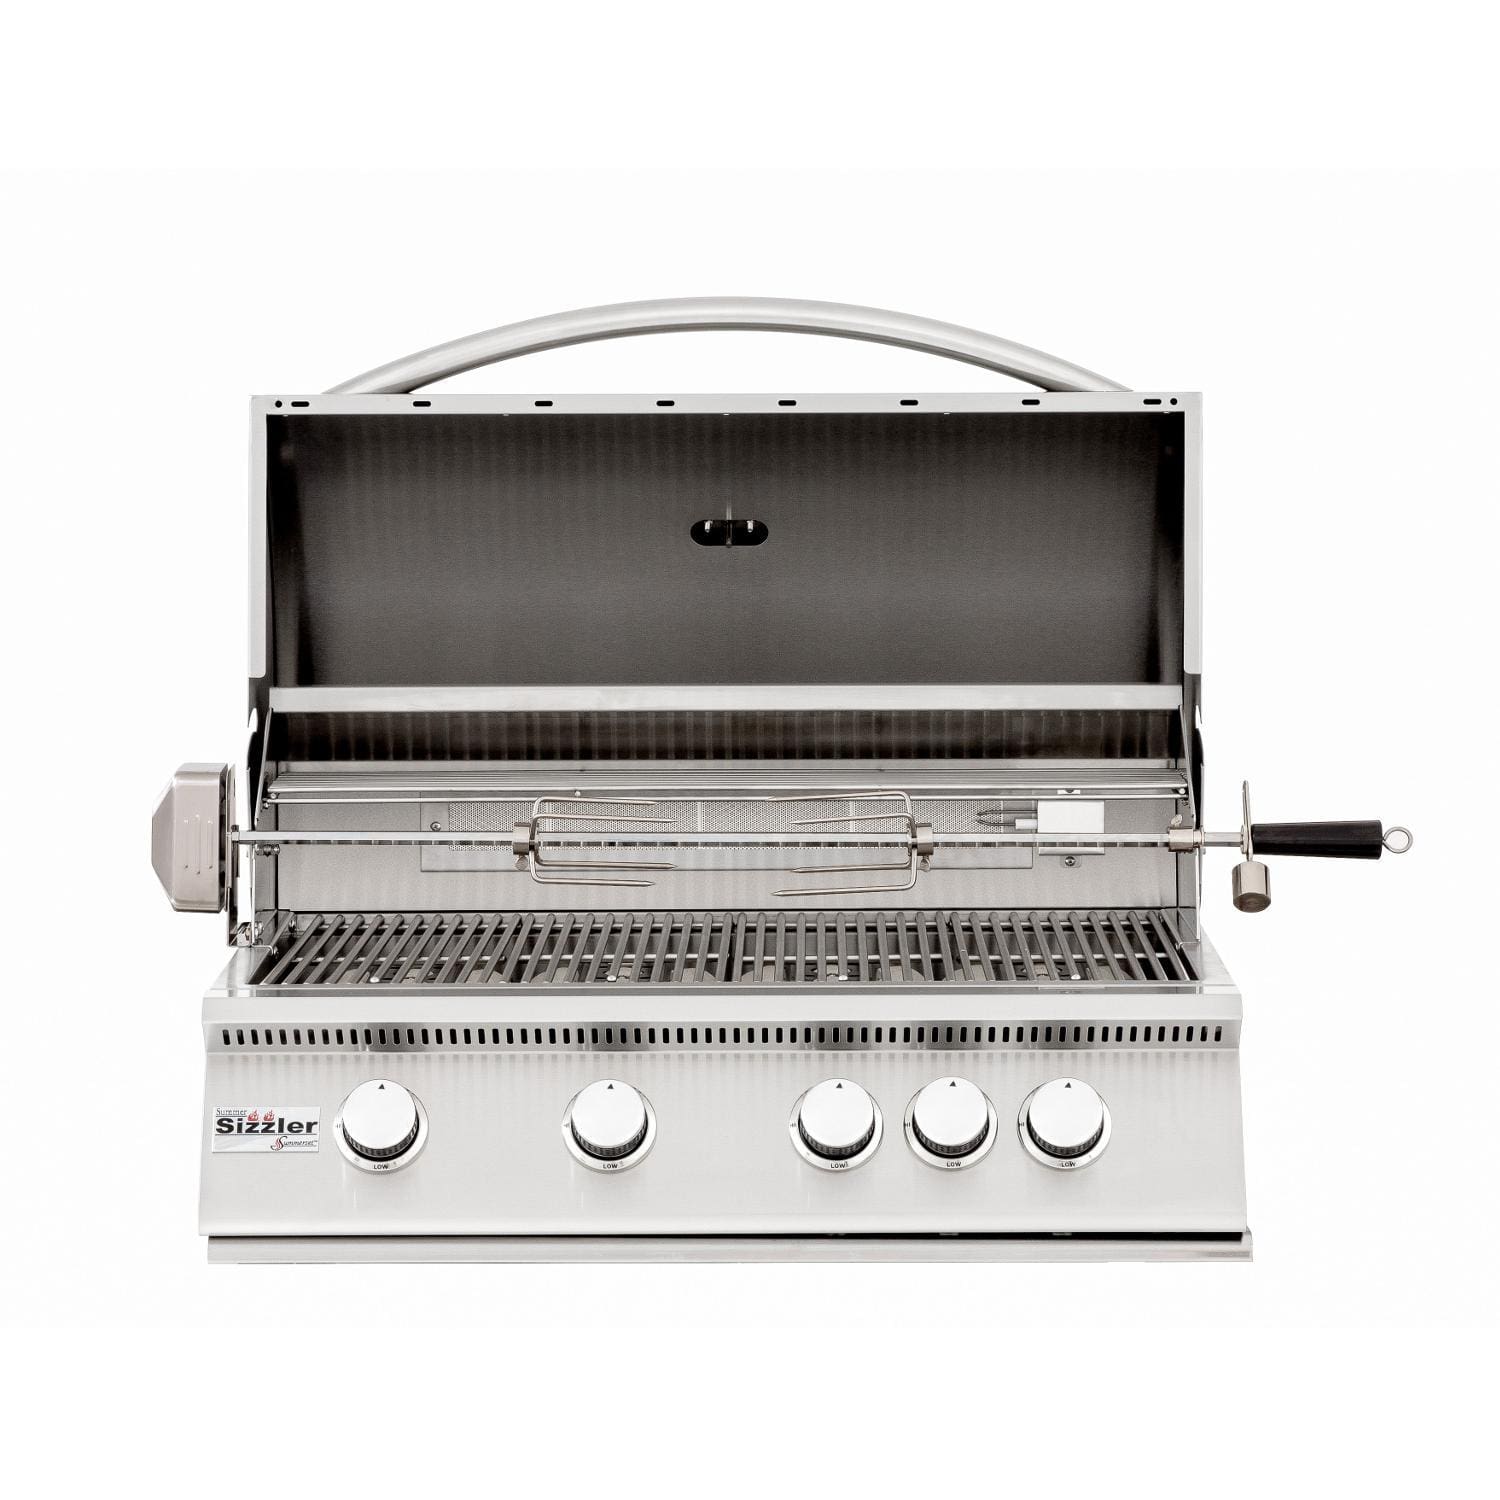 Summerset Grills Premium Gas Grill Summerset Sizzler 32-Inch 4-Burner | Free Standing | Propane OR Natural Gas | Grill With Rear Infrared Burner - SIZ32